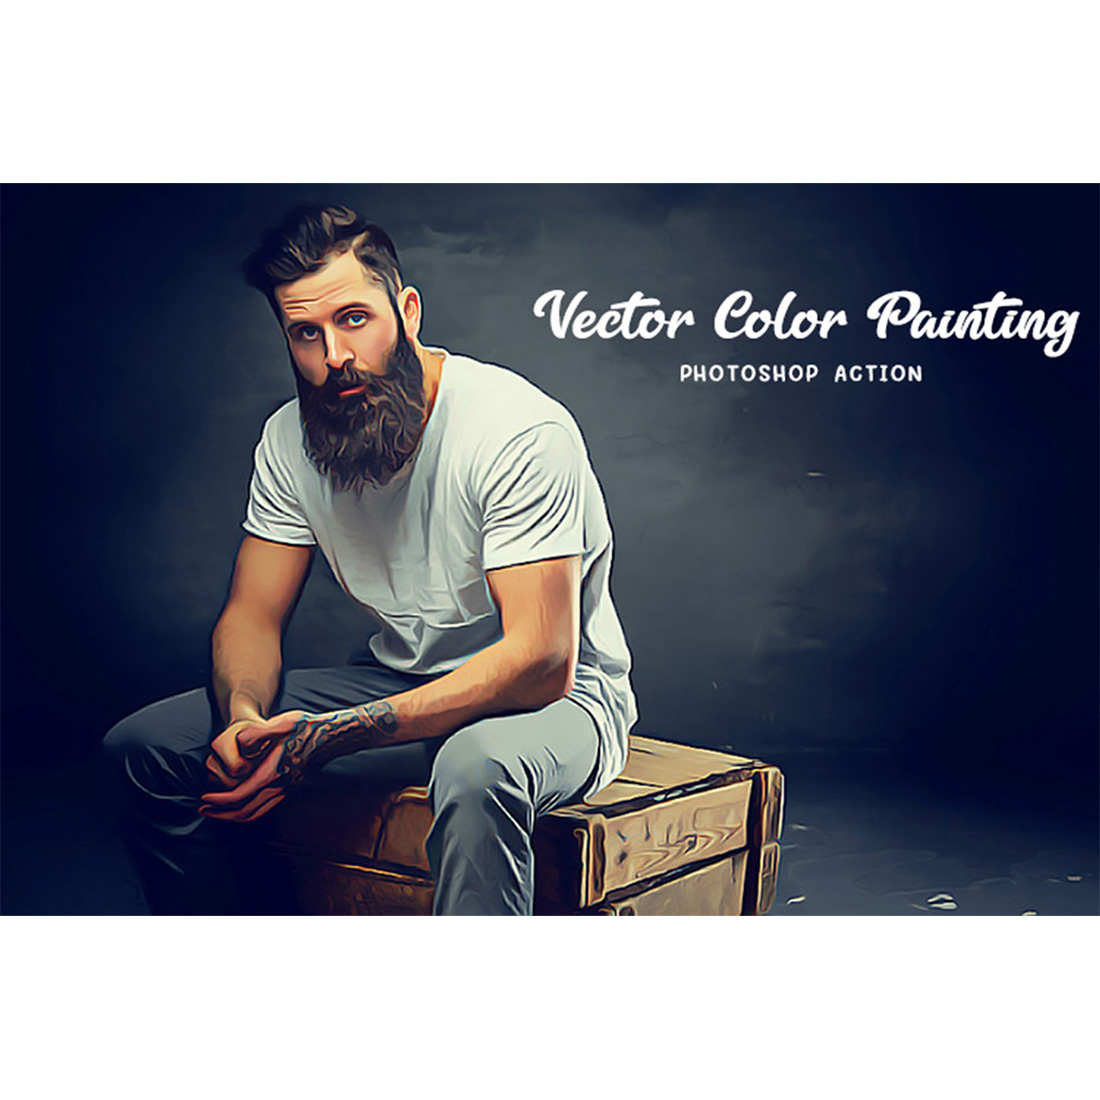 Vector Color Painting Photoshop Action cover image.